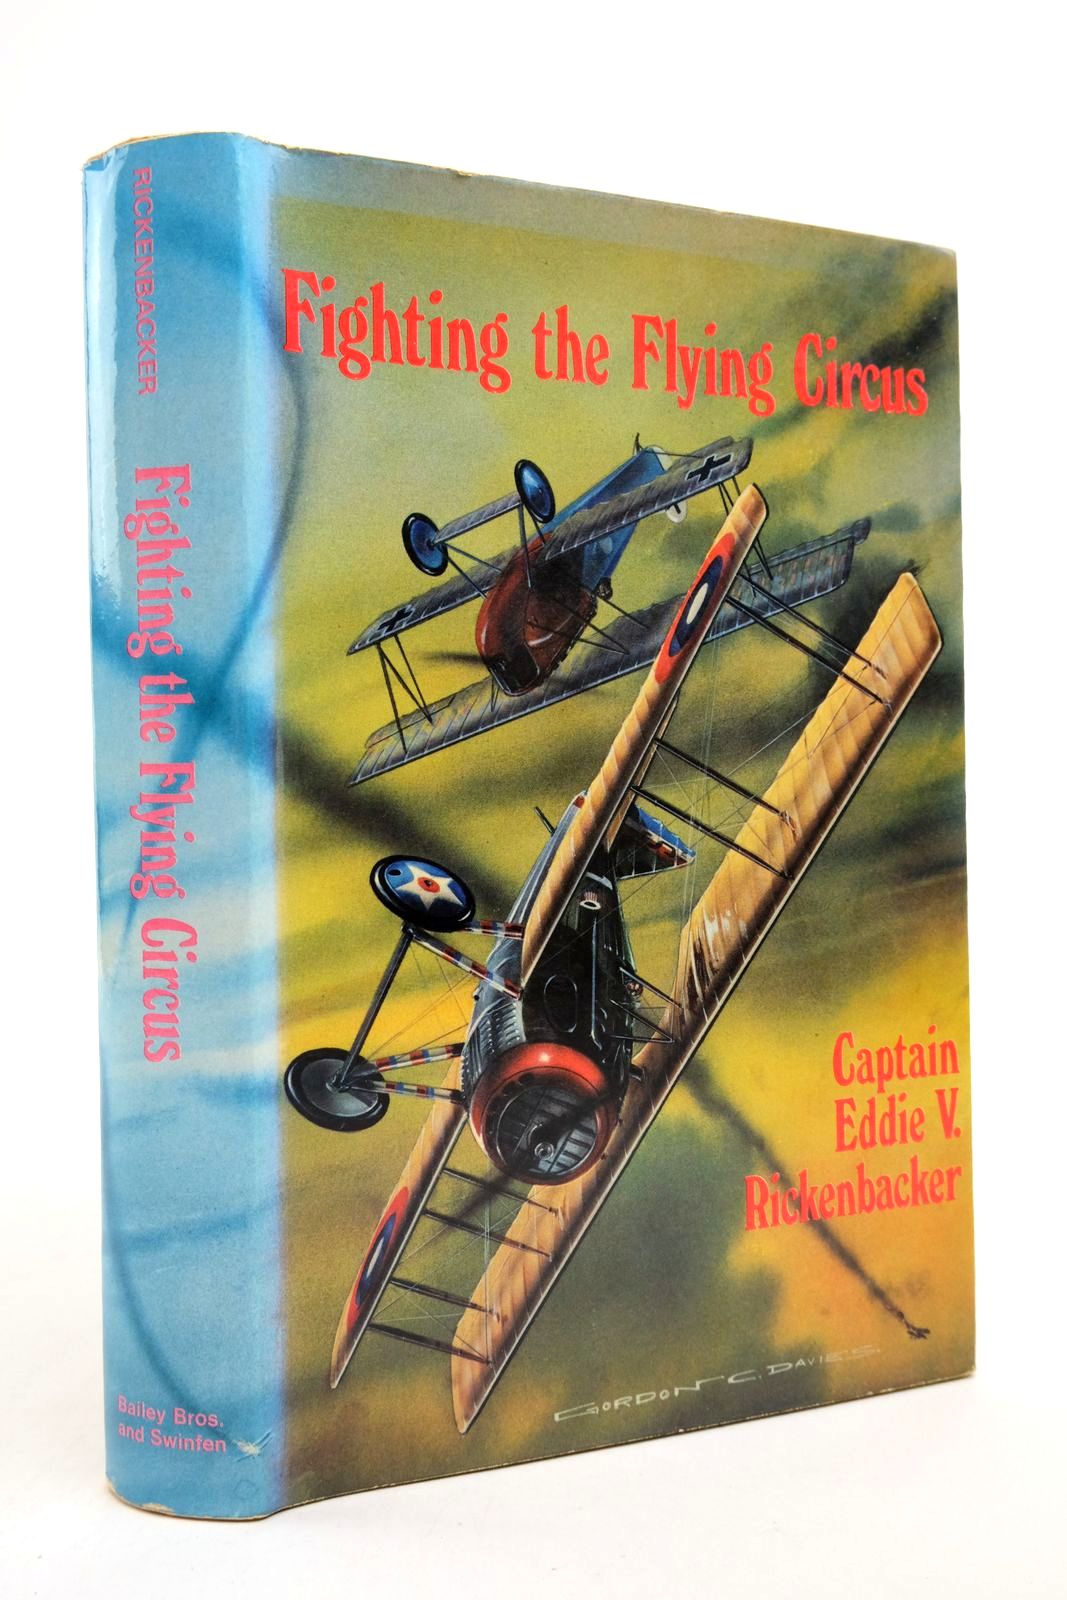 Photo of FIGHTING THE FLYING CIRCUS written by Rickenbacker, Eddie V. Whitehouse, Arch published by Bailey Brothers and Swinfen Ltd. (STOCK CODE: 2139886)  for sale by Stella & Rose's Books